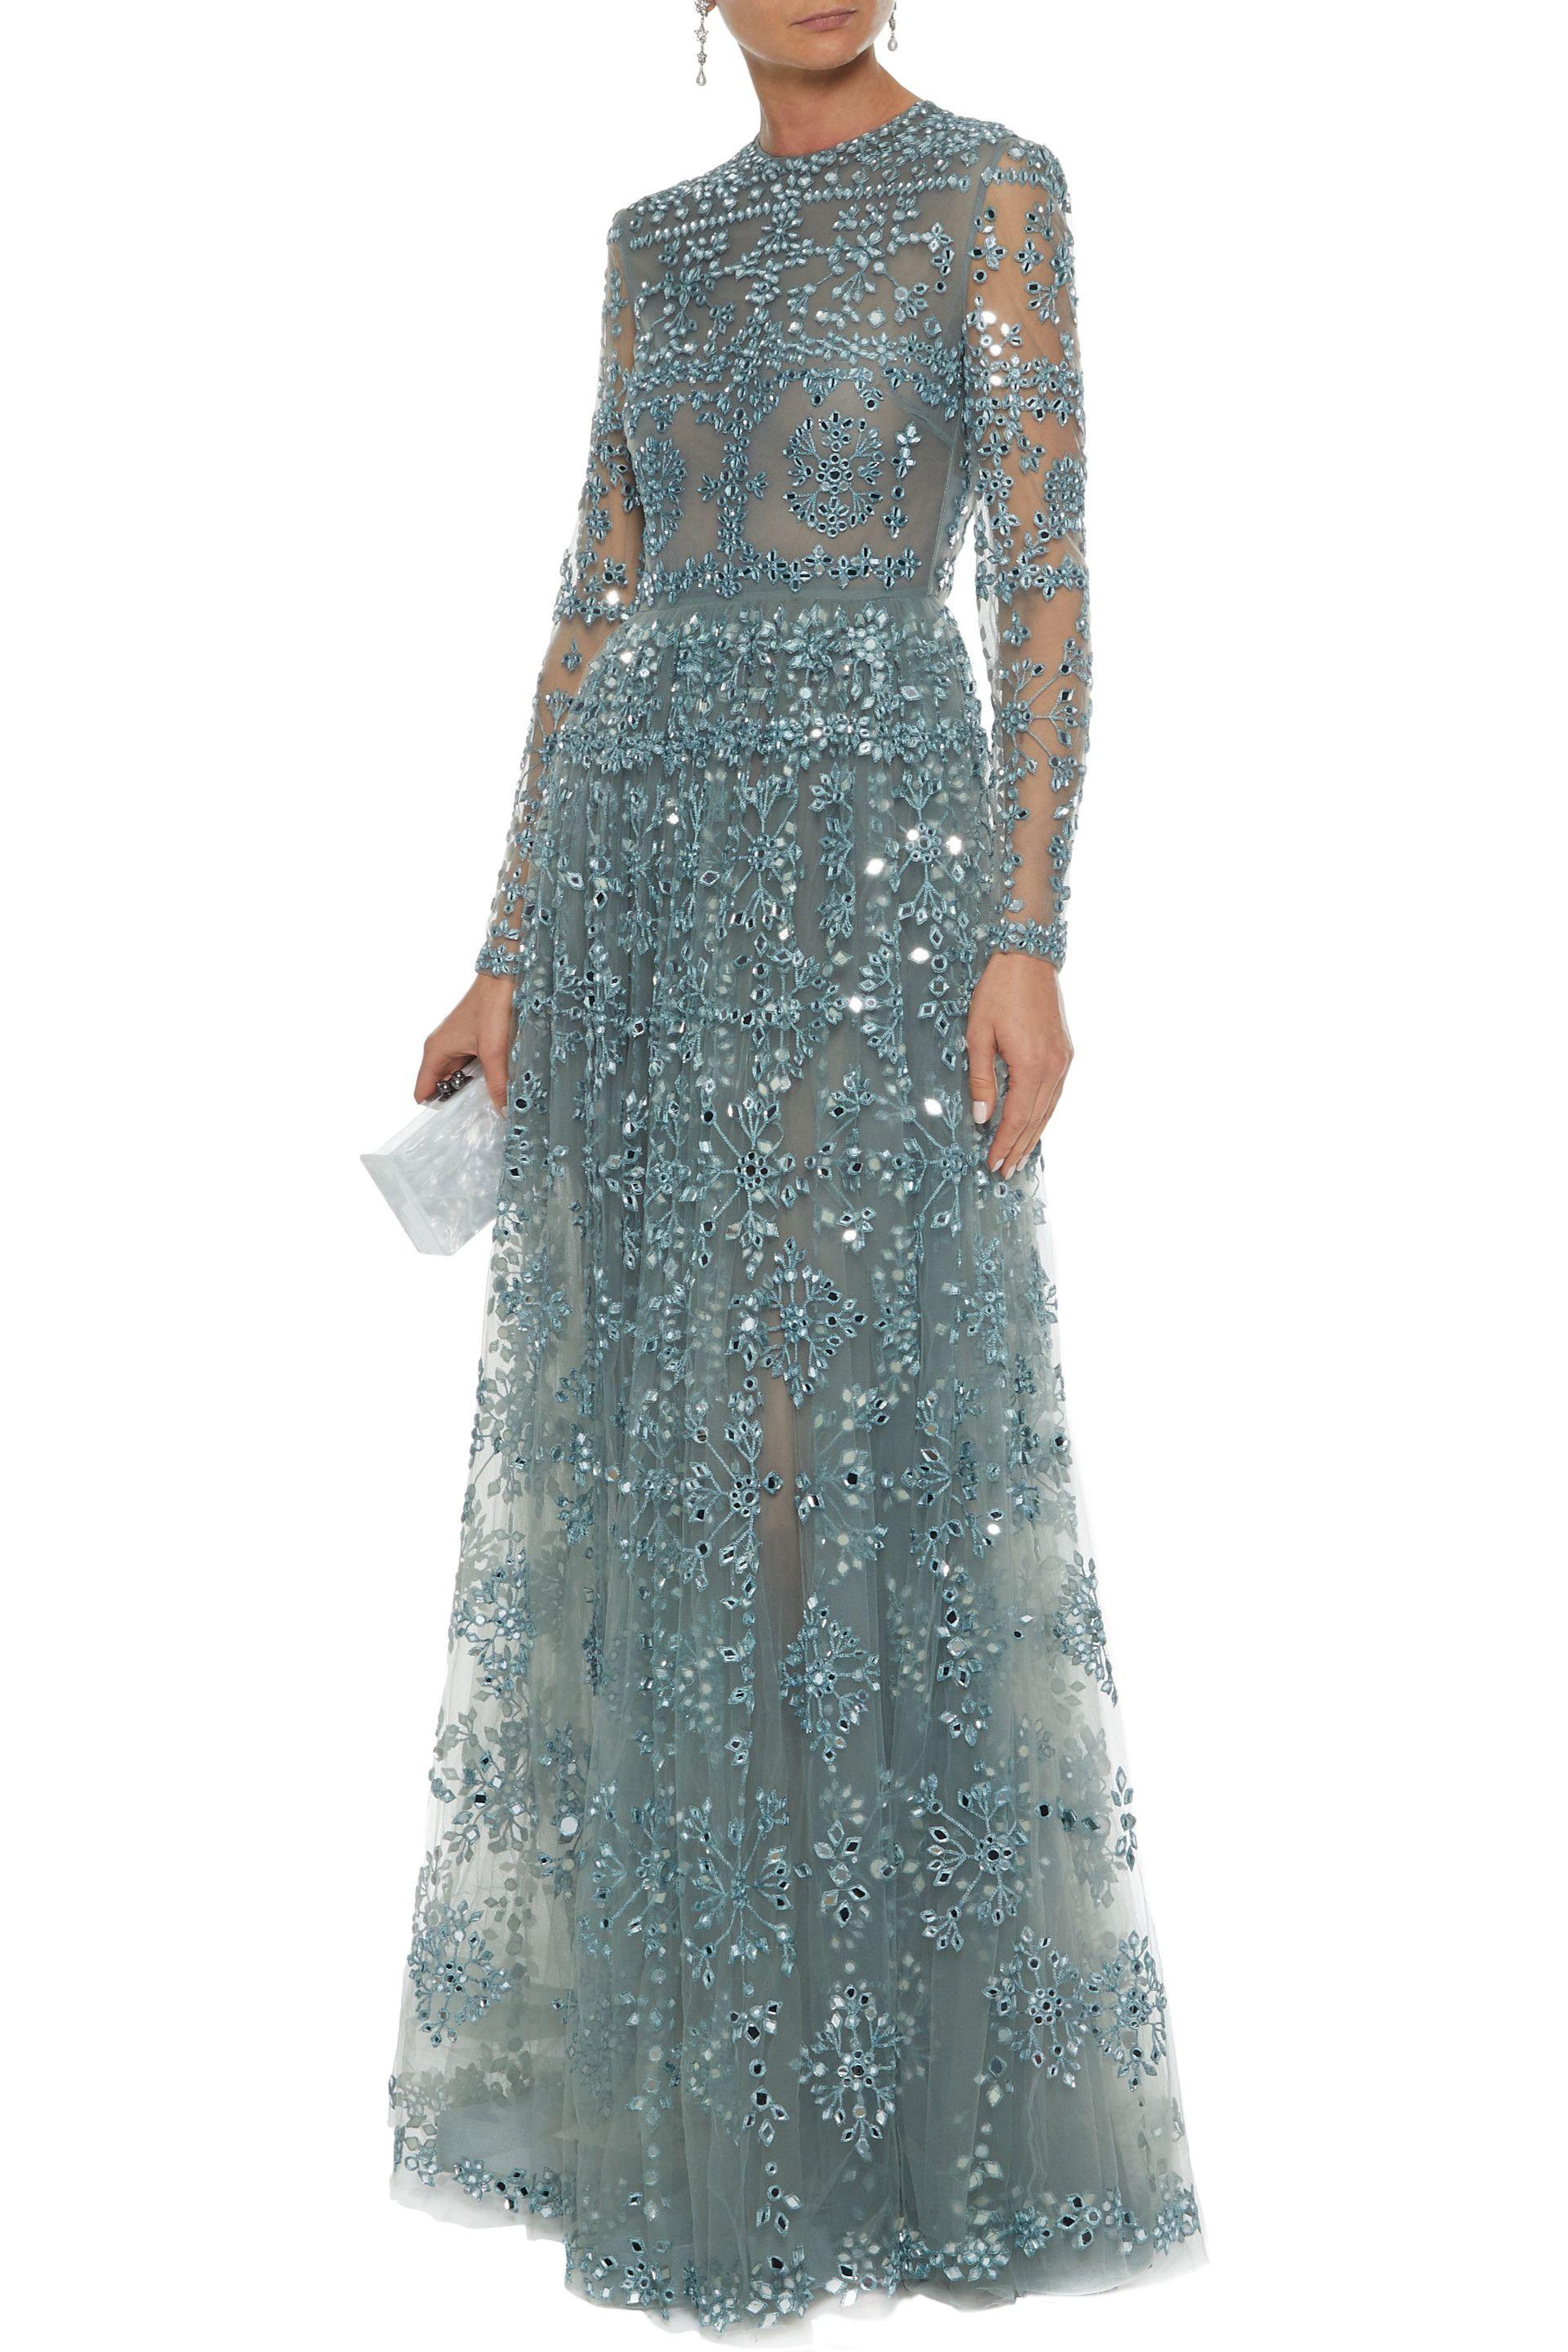 Valentino Embellished Tulle Gown in ...